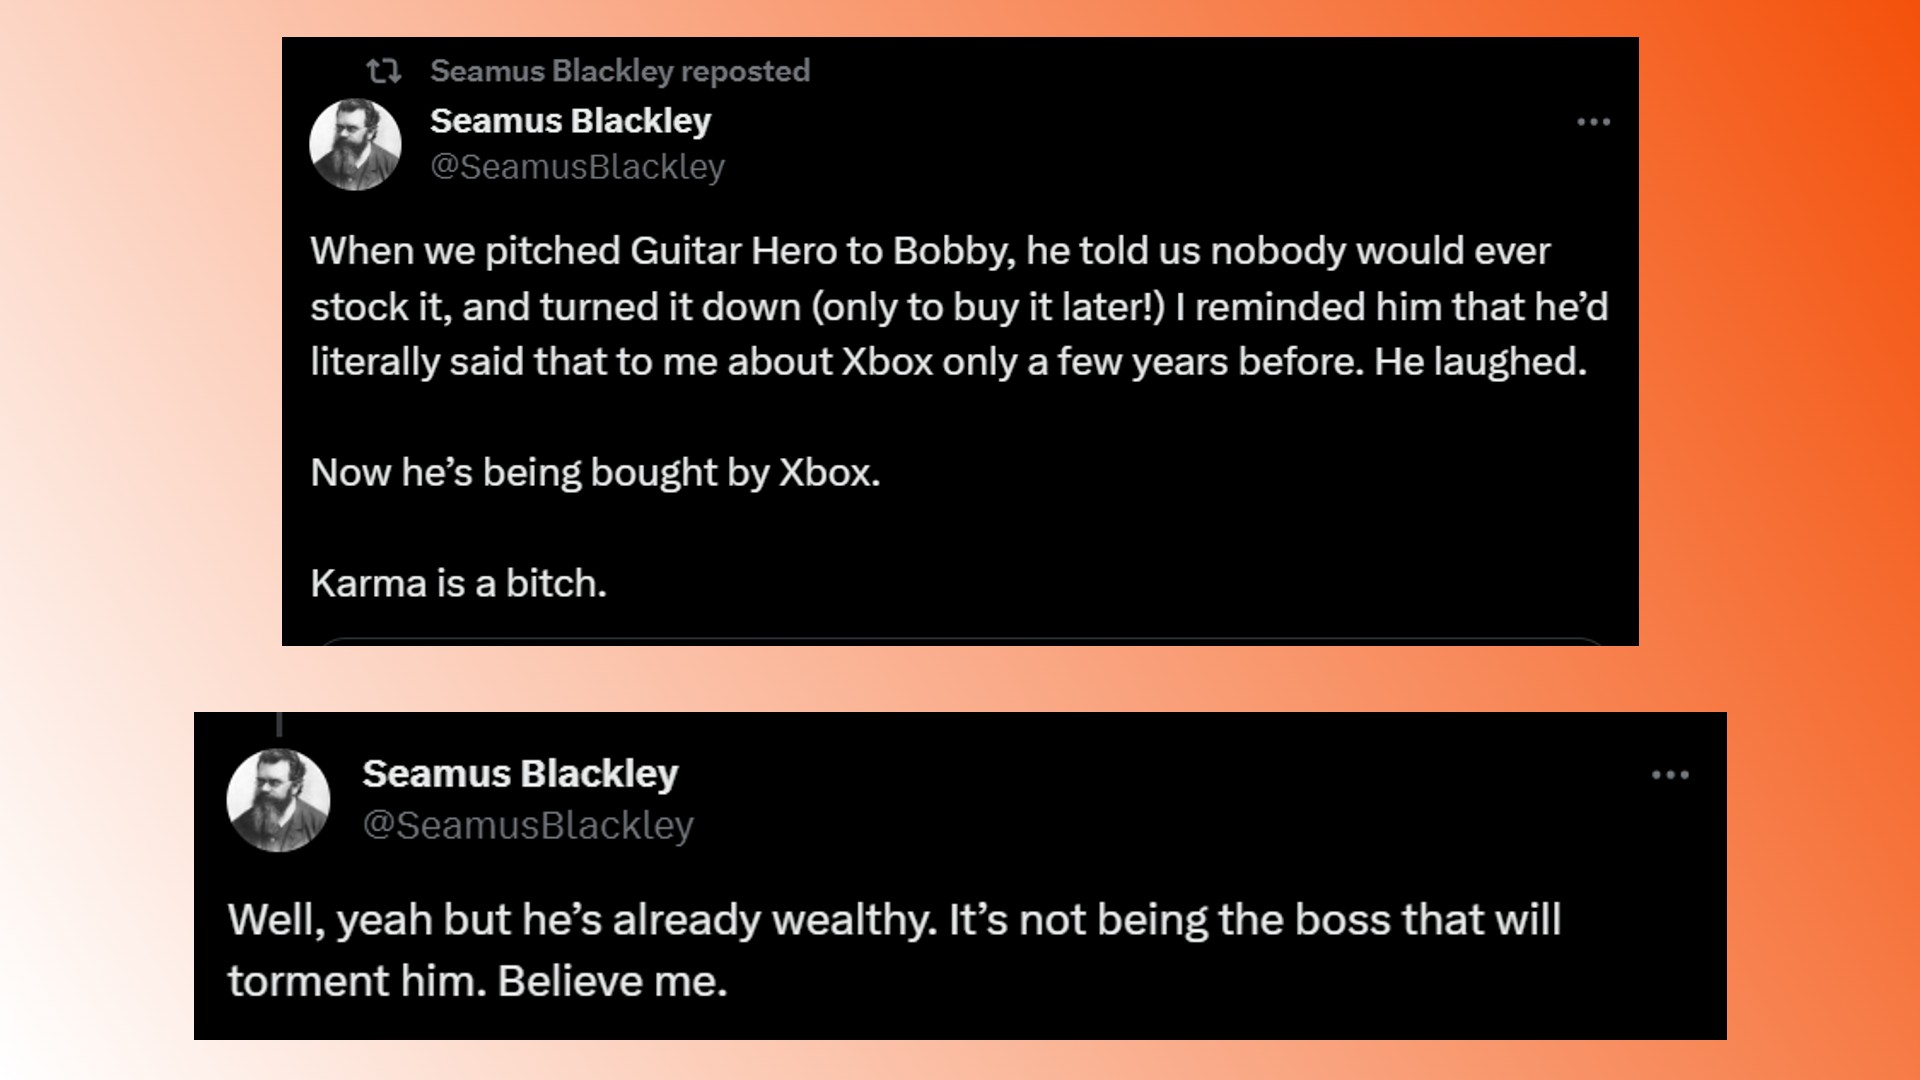 Microsoft Activision Blizzard deal: A comment from Xbox creator Seamus Blackley about Bobby Kotick